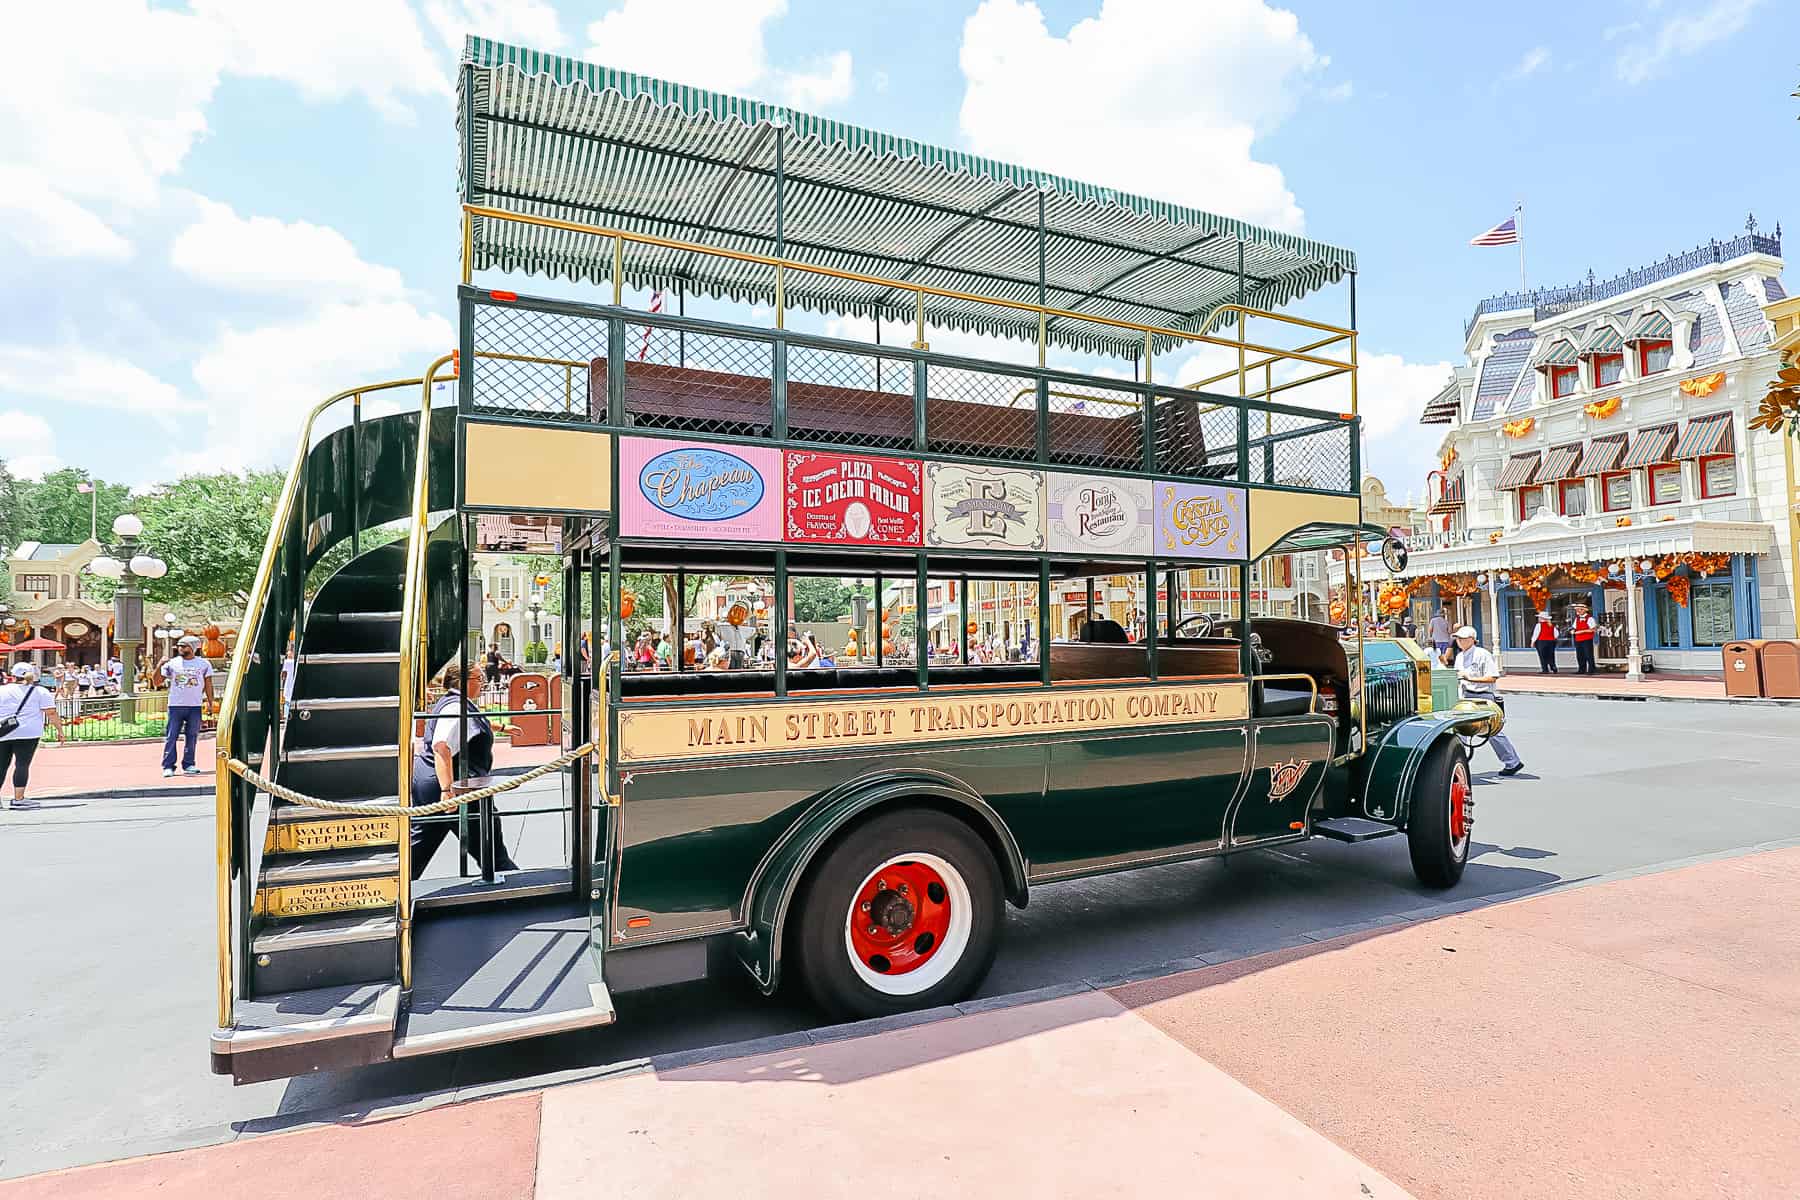 Omnibus at Magic Kingdom with a sign that says Main Street Transportation Company. 